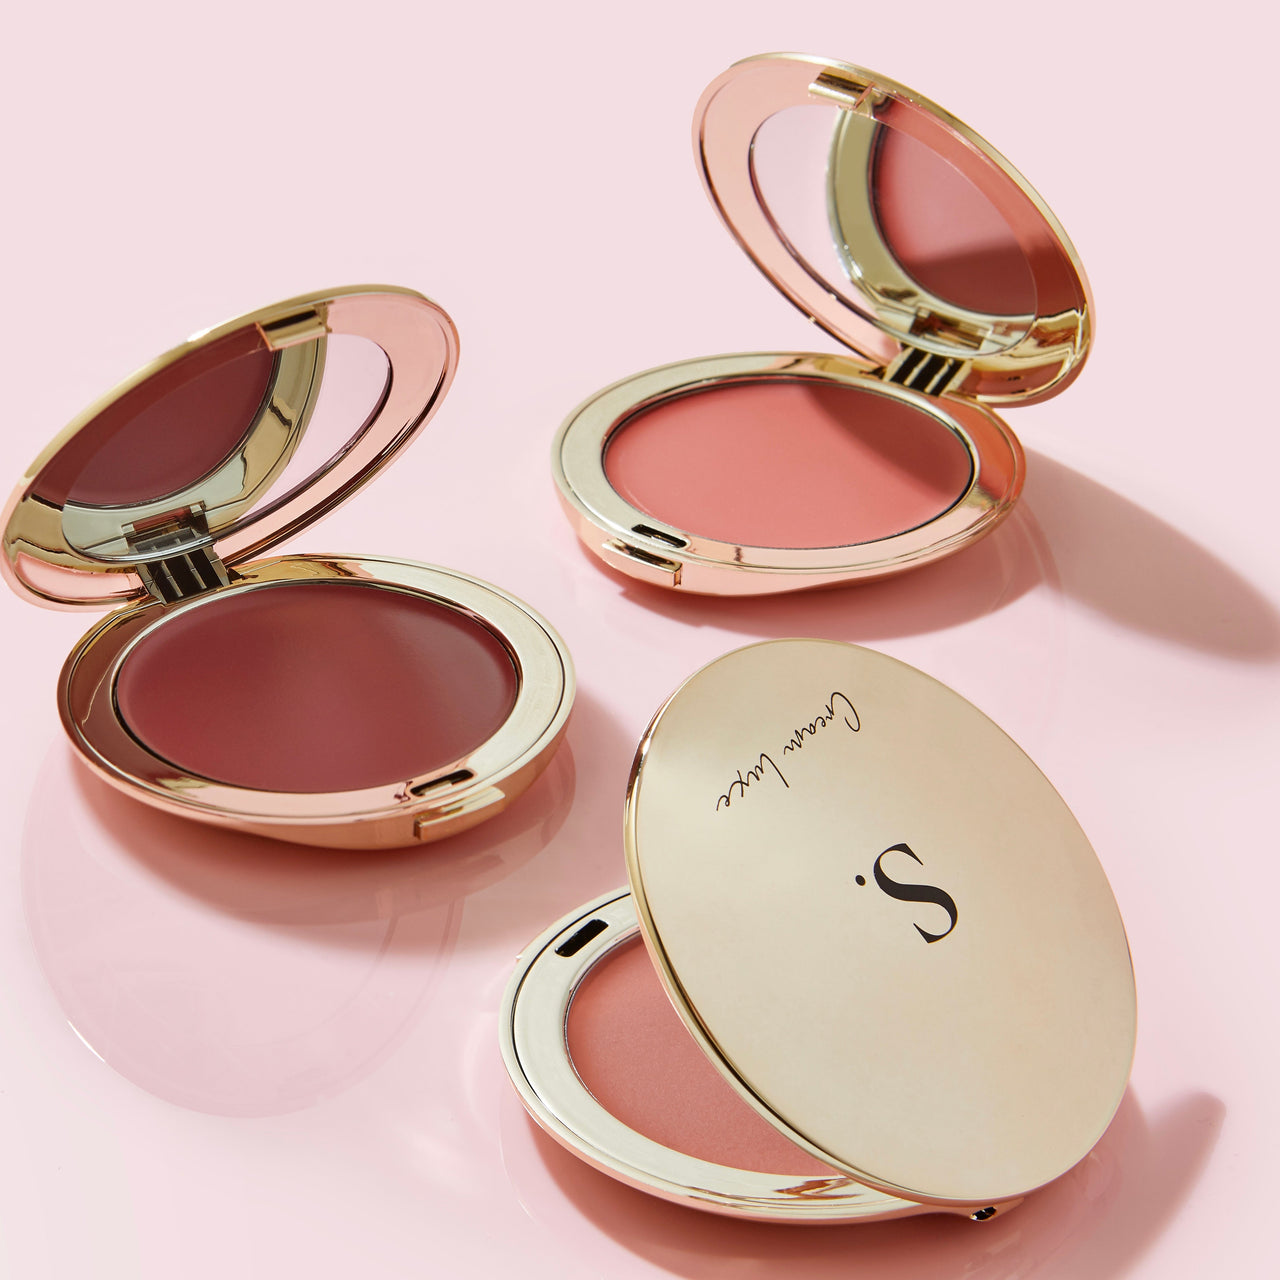 How to find the right blush for you